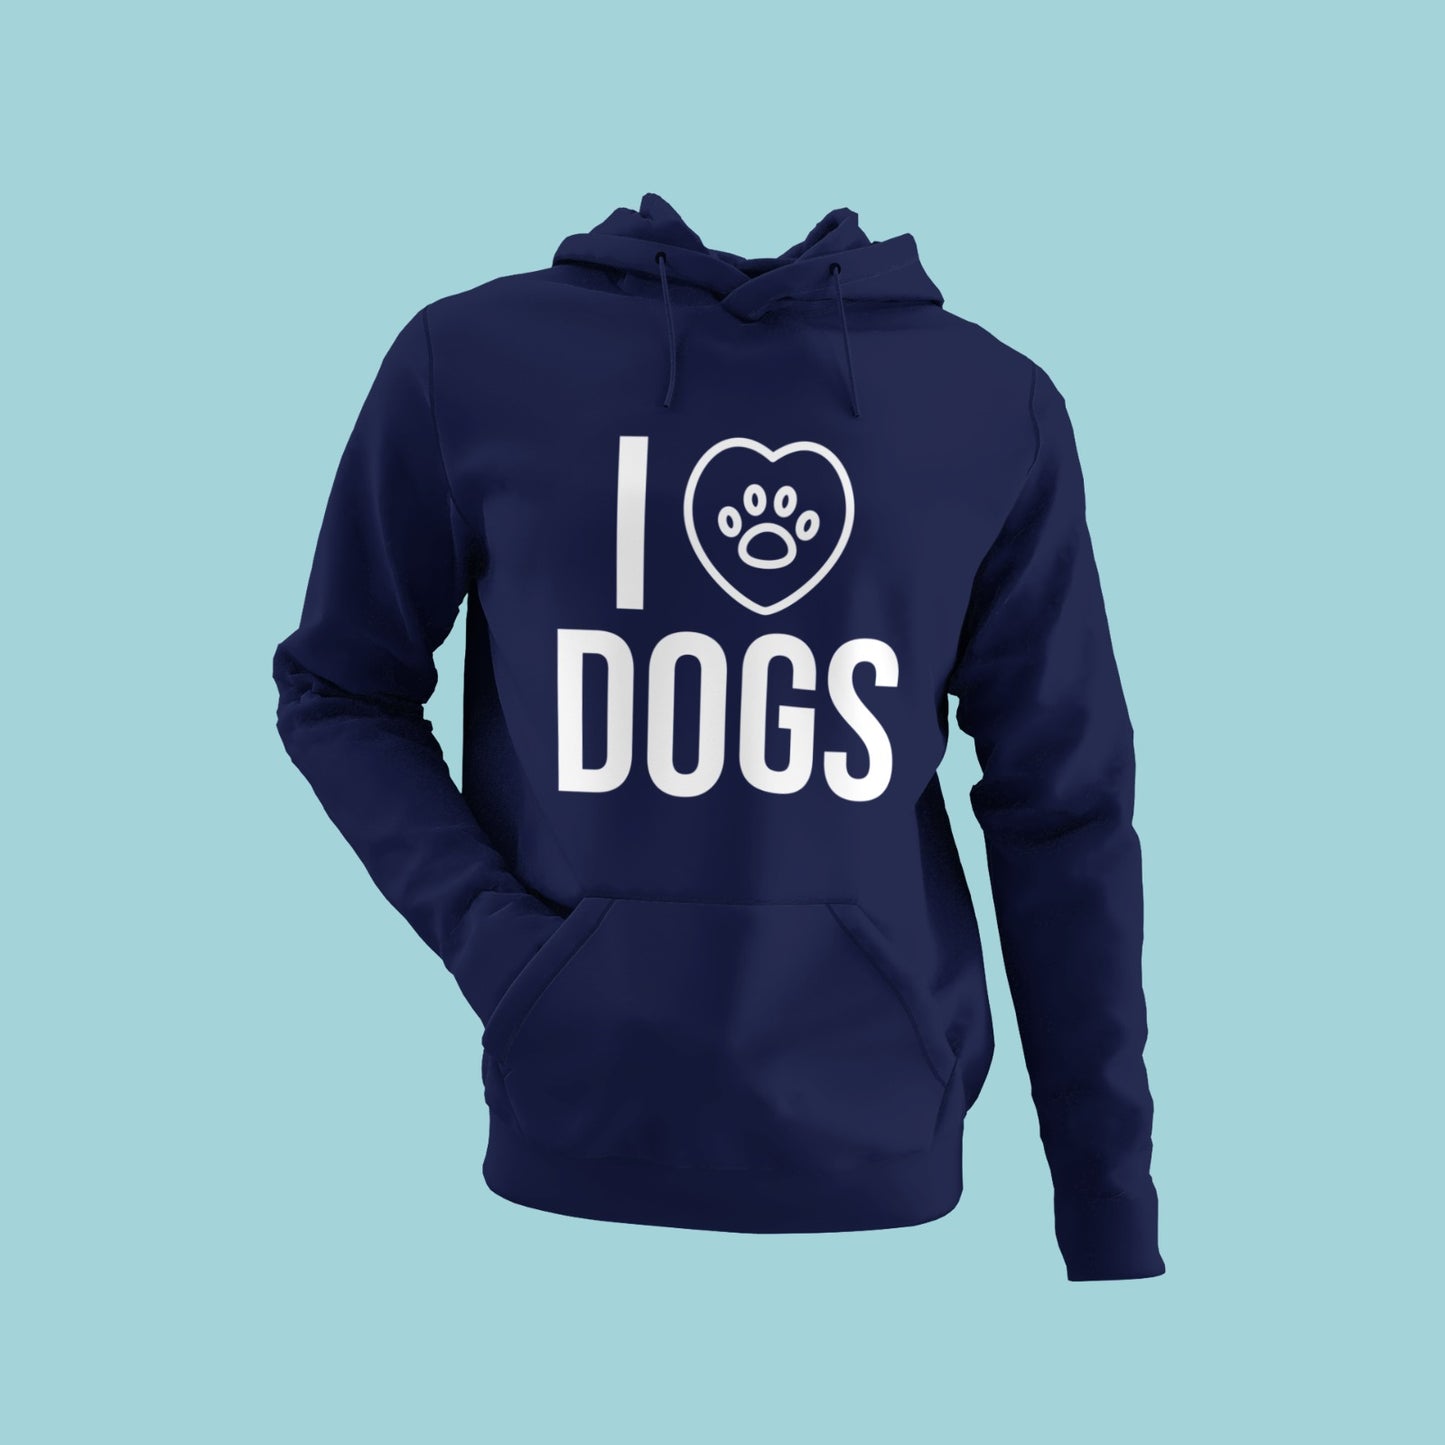 Express your passion for pups with our navy blue hoodie featuring the classic "I ♥ dogs" message with a paw symbol. Made from premium materials, this hoodie is soft, durable, and perfect for casual wear. Stay cozy and stylish while spreading the love for dogs with this must-have hoodie. Order now and show your support for man's best friend.